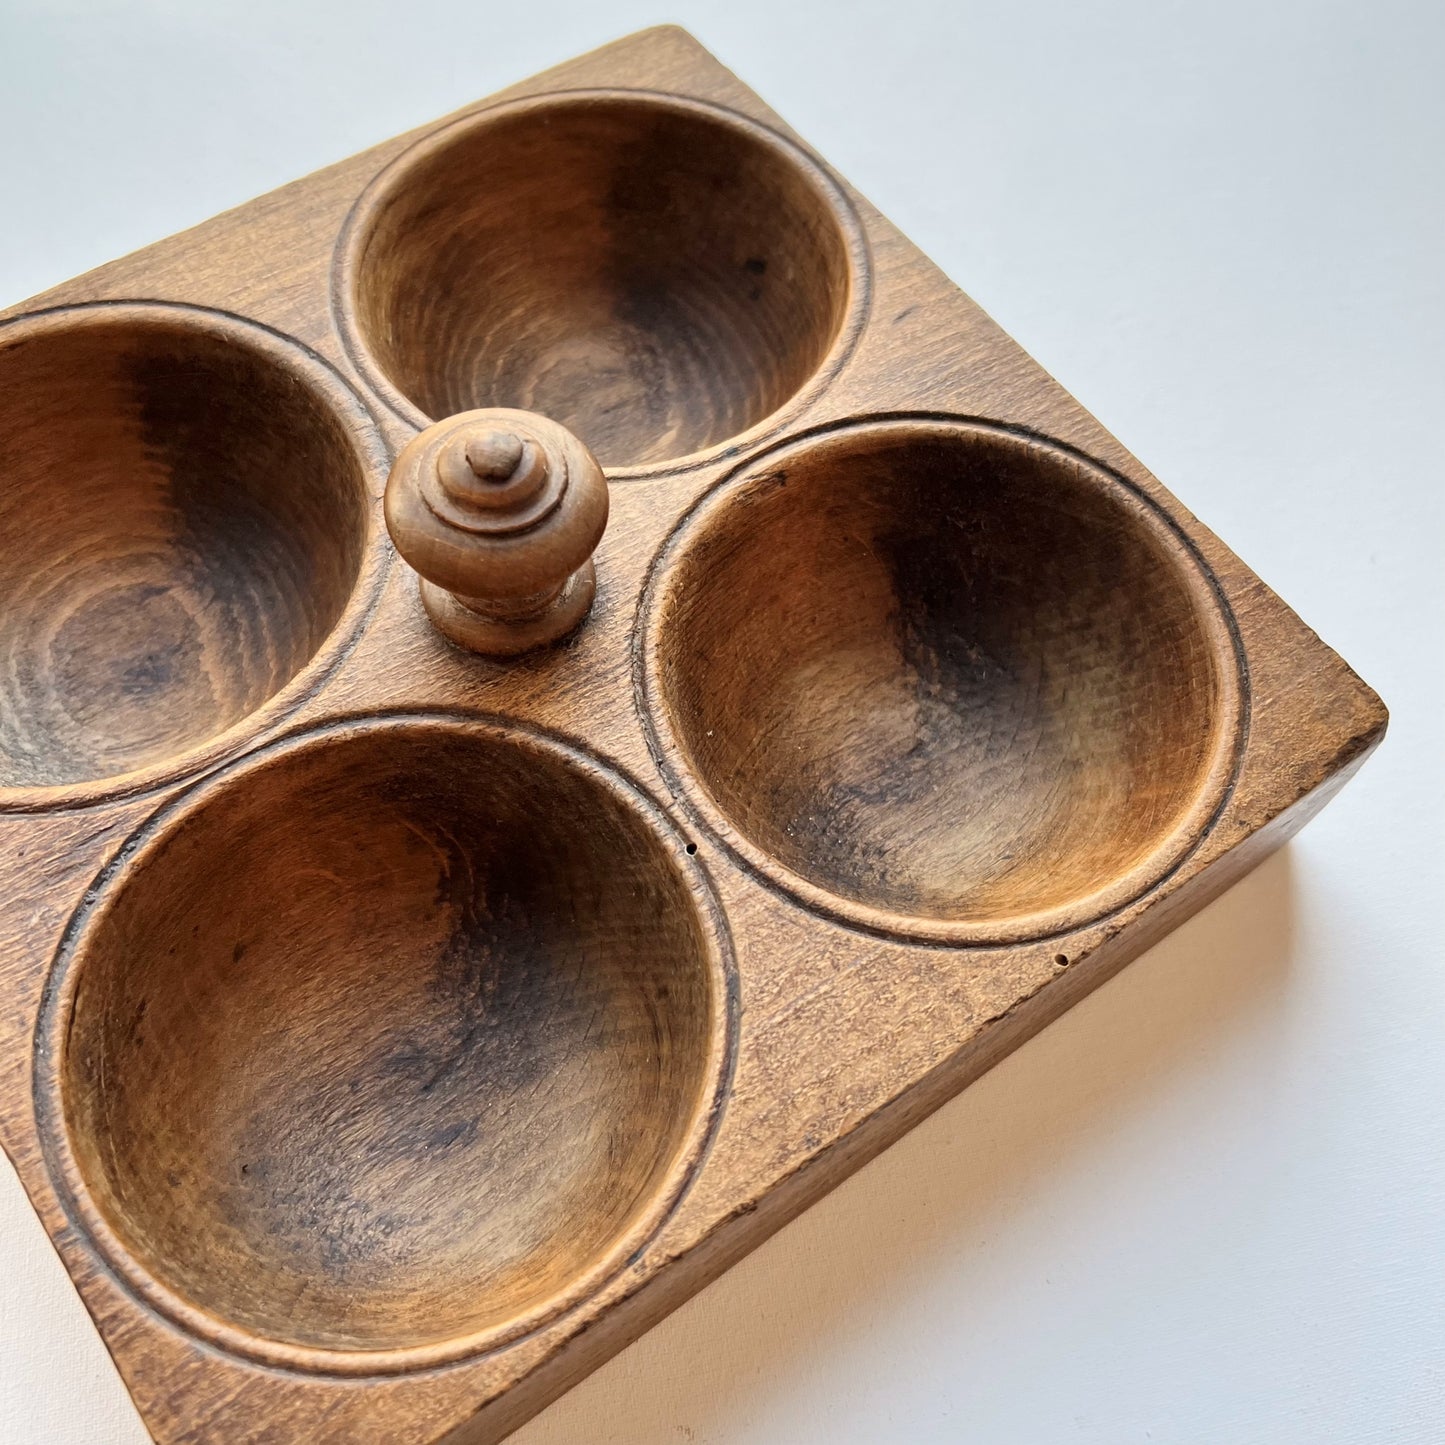 【Vintage】France - 1940‐50s Wooden Tray